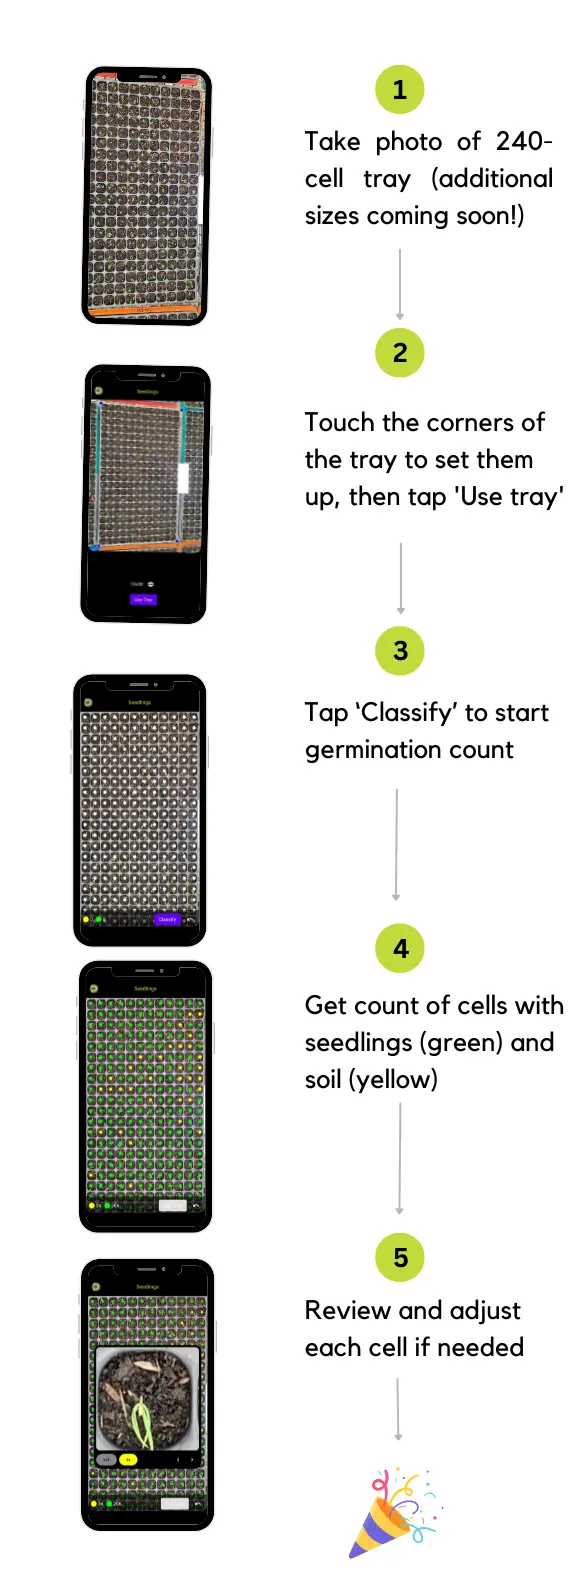 Germination Count with smartphone app Petiole Pro